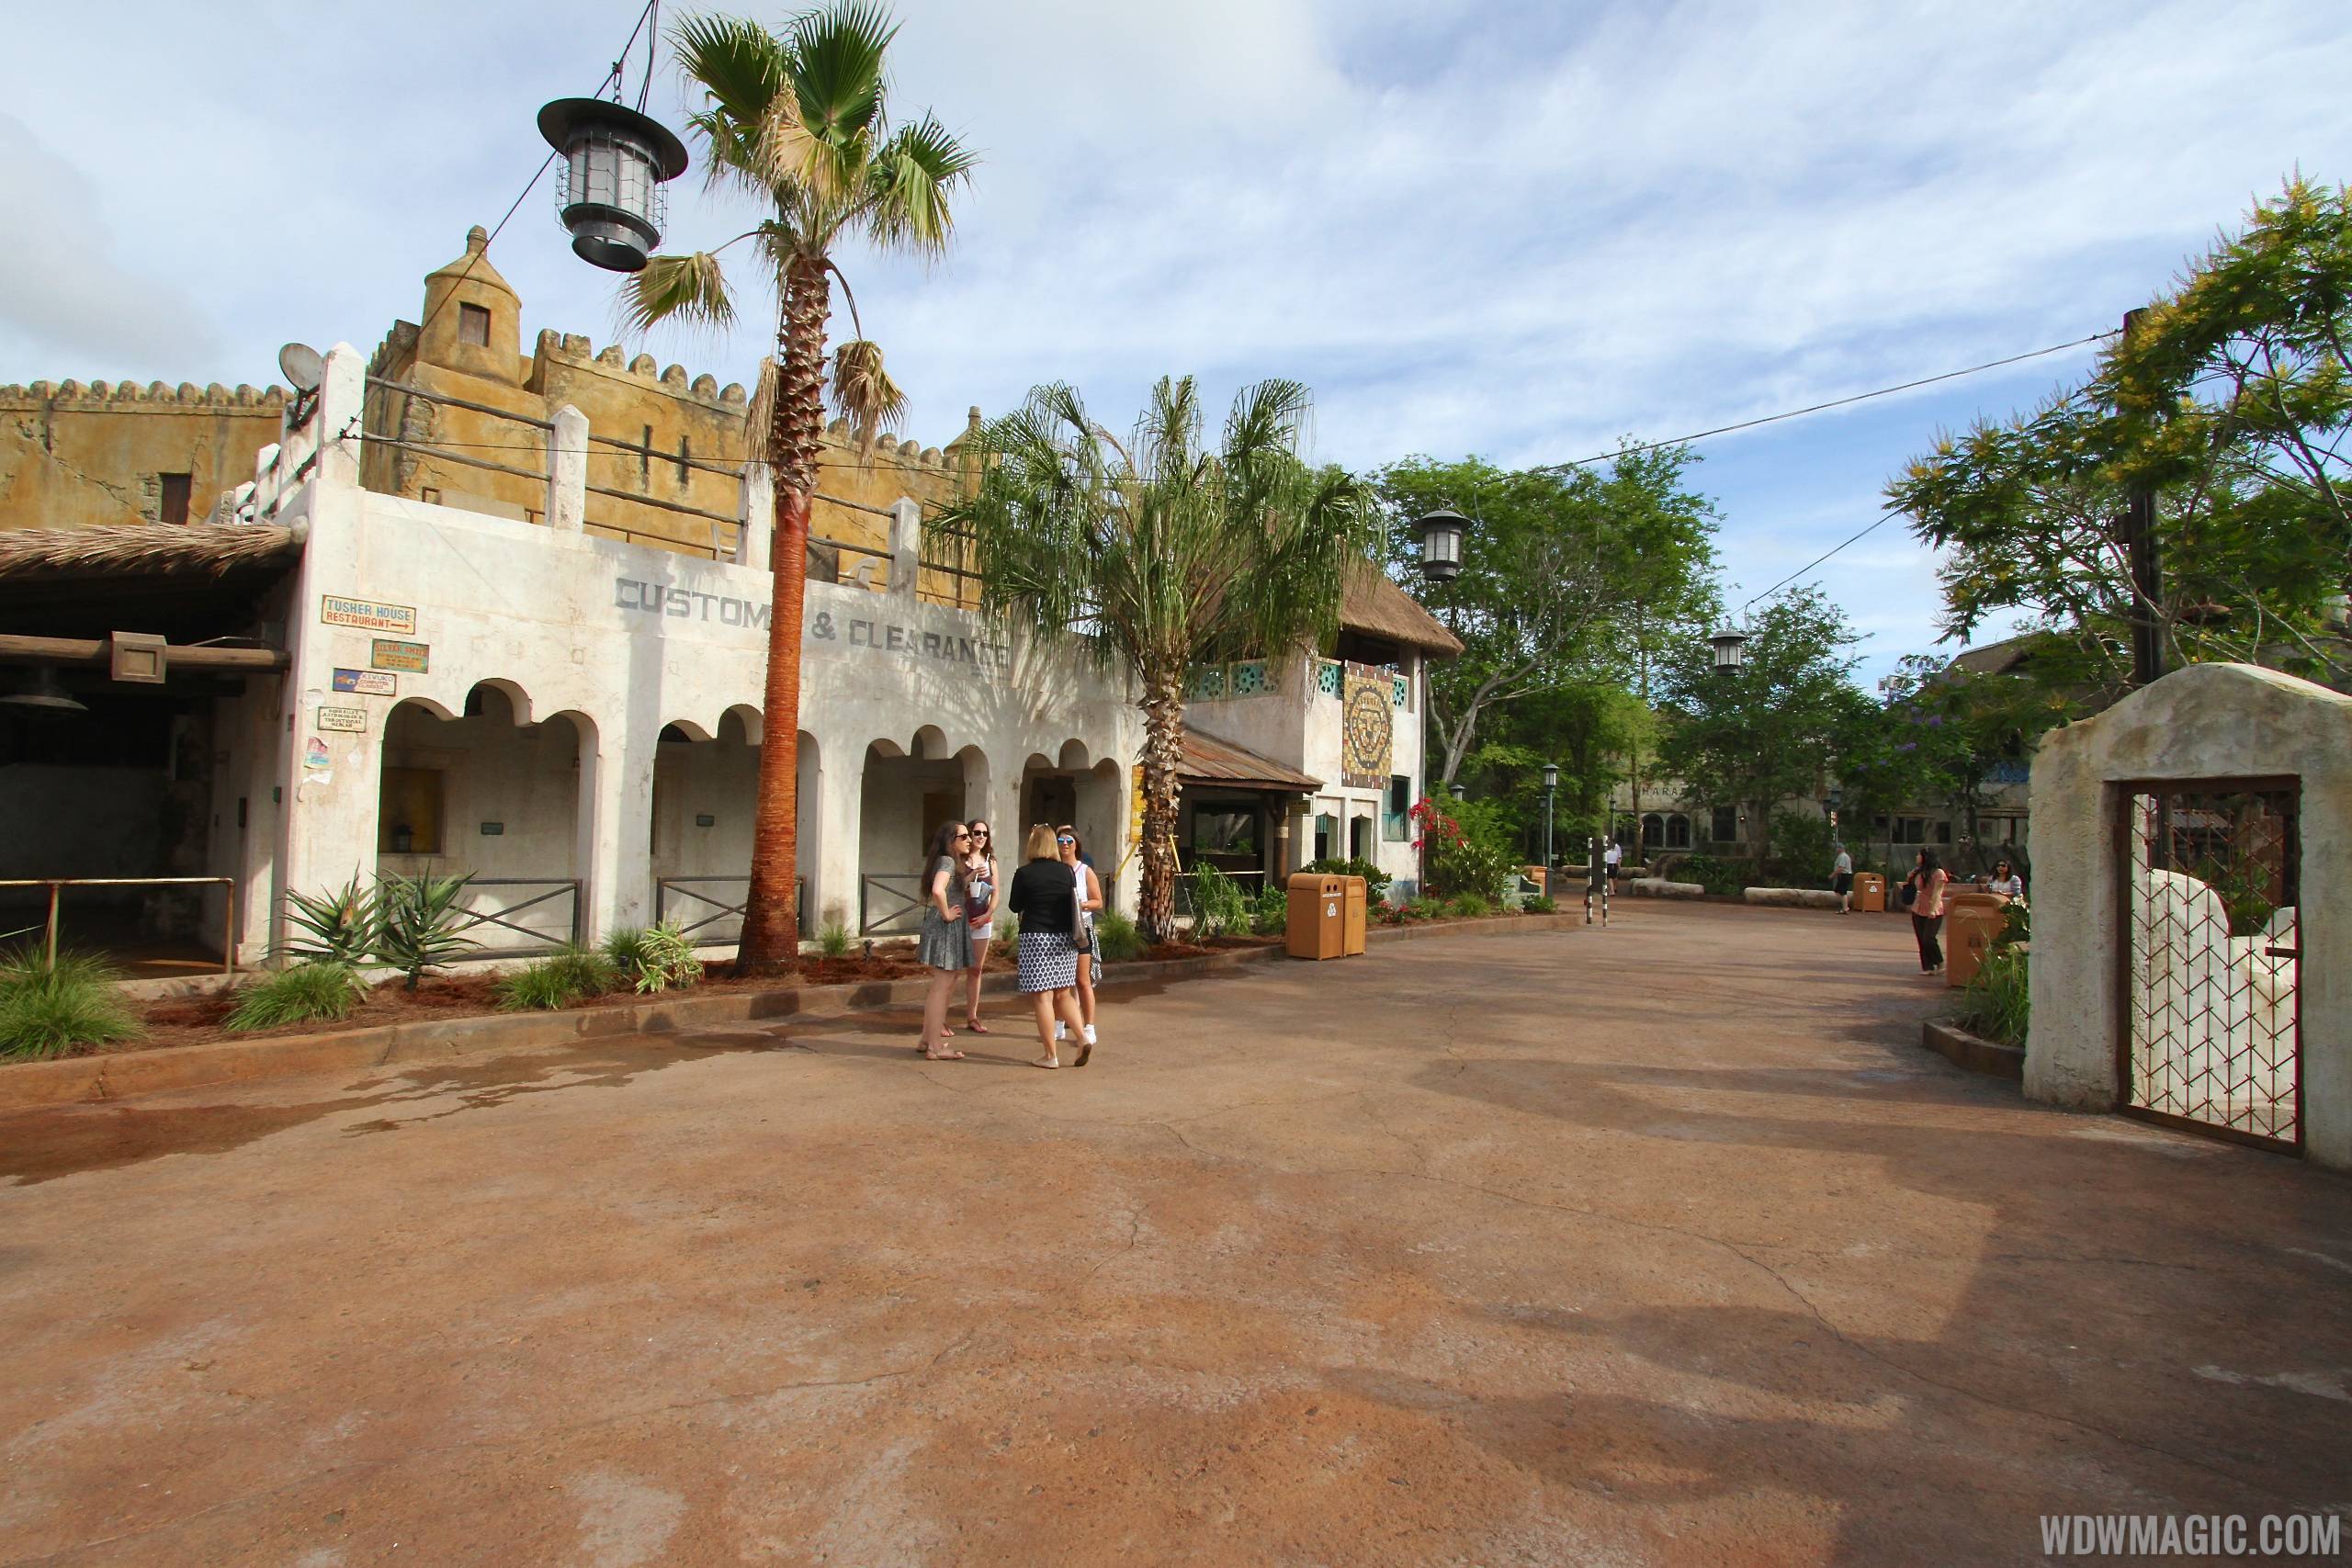 New Harambe Theatre area in Africa - Overview of the area and FastPass+ queue